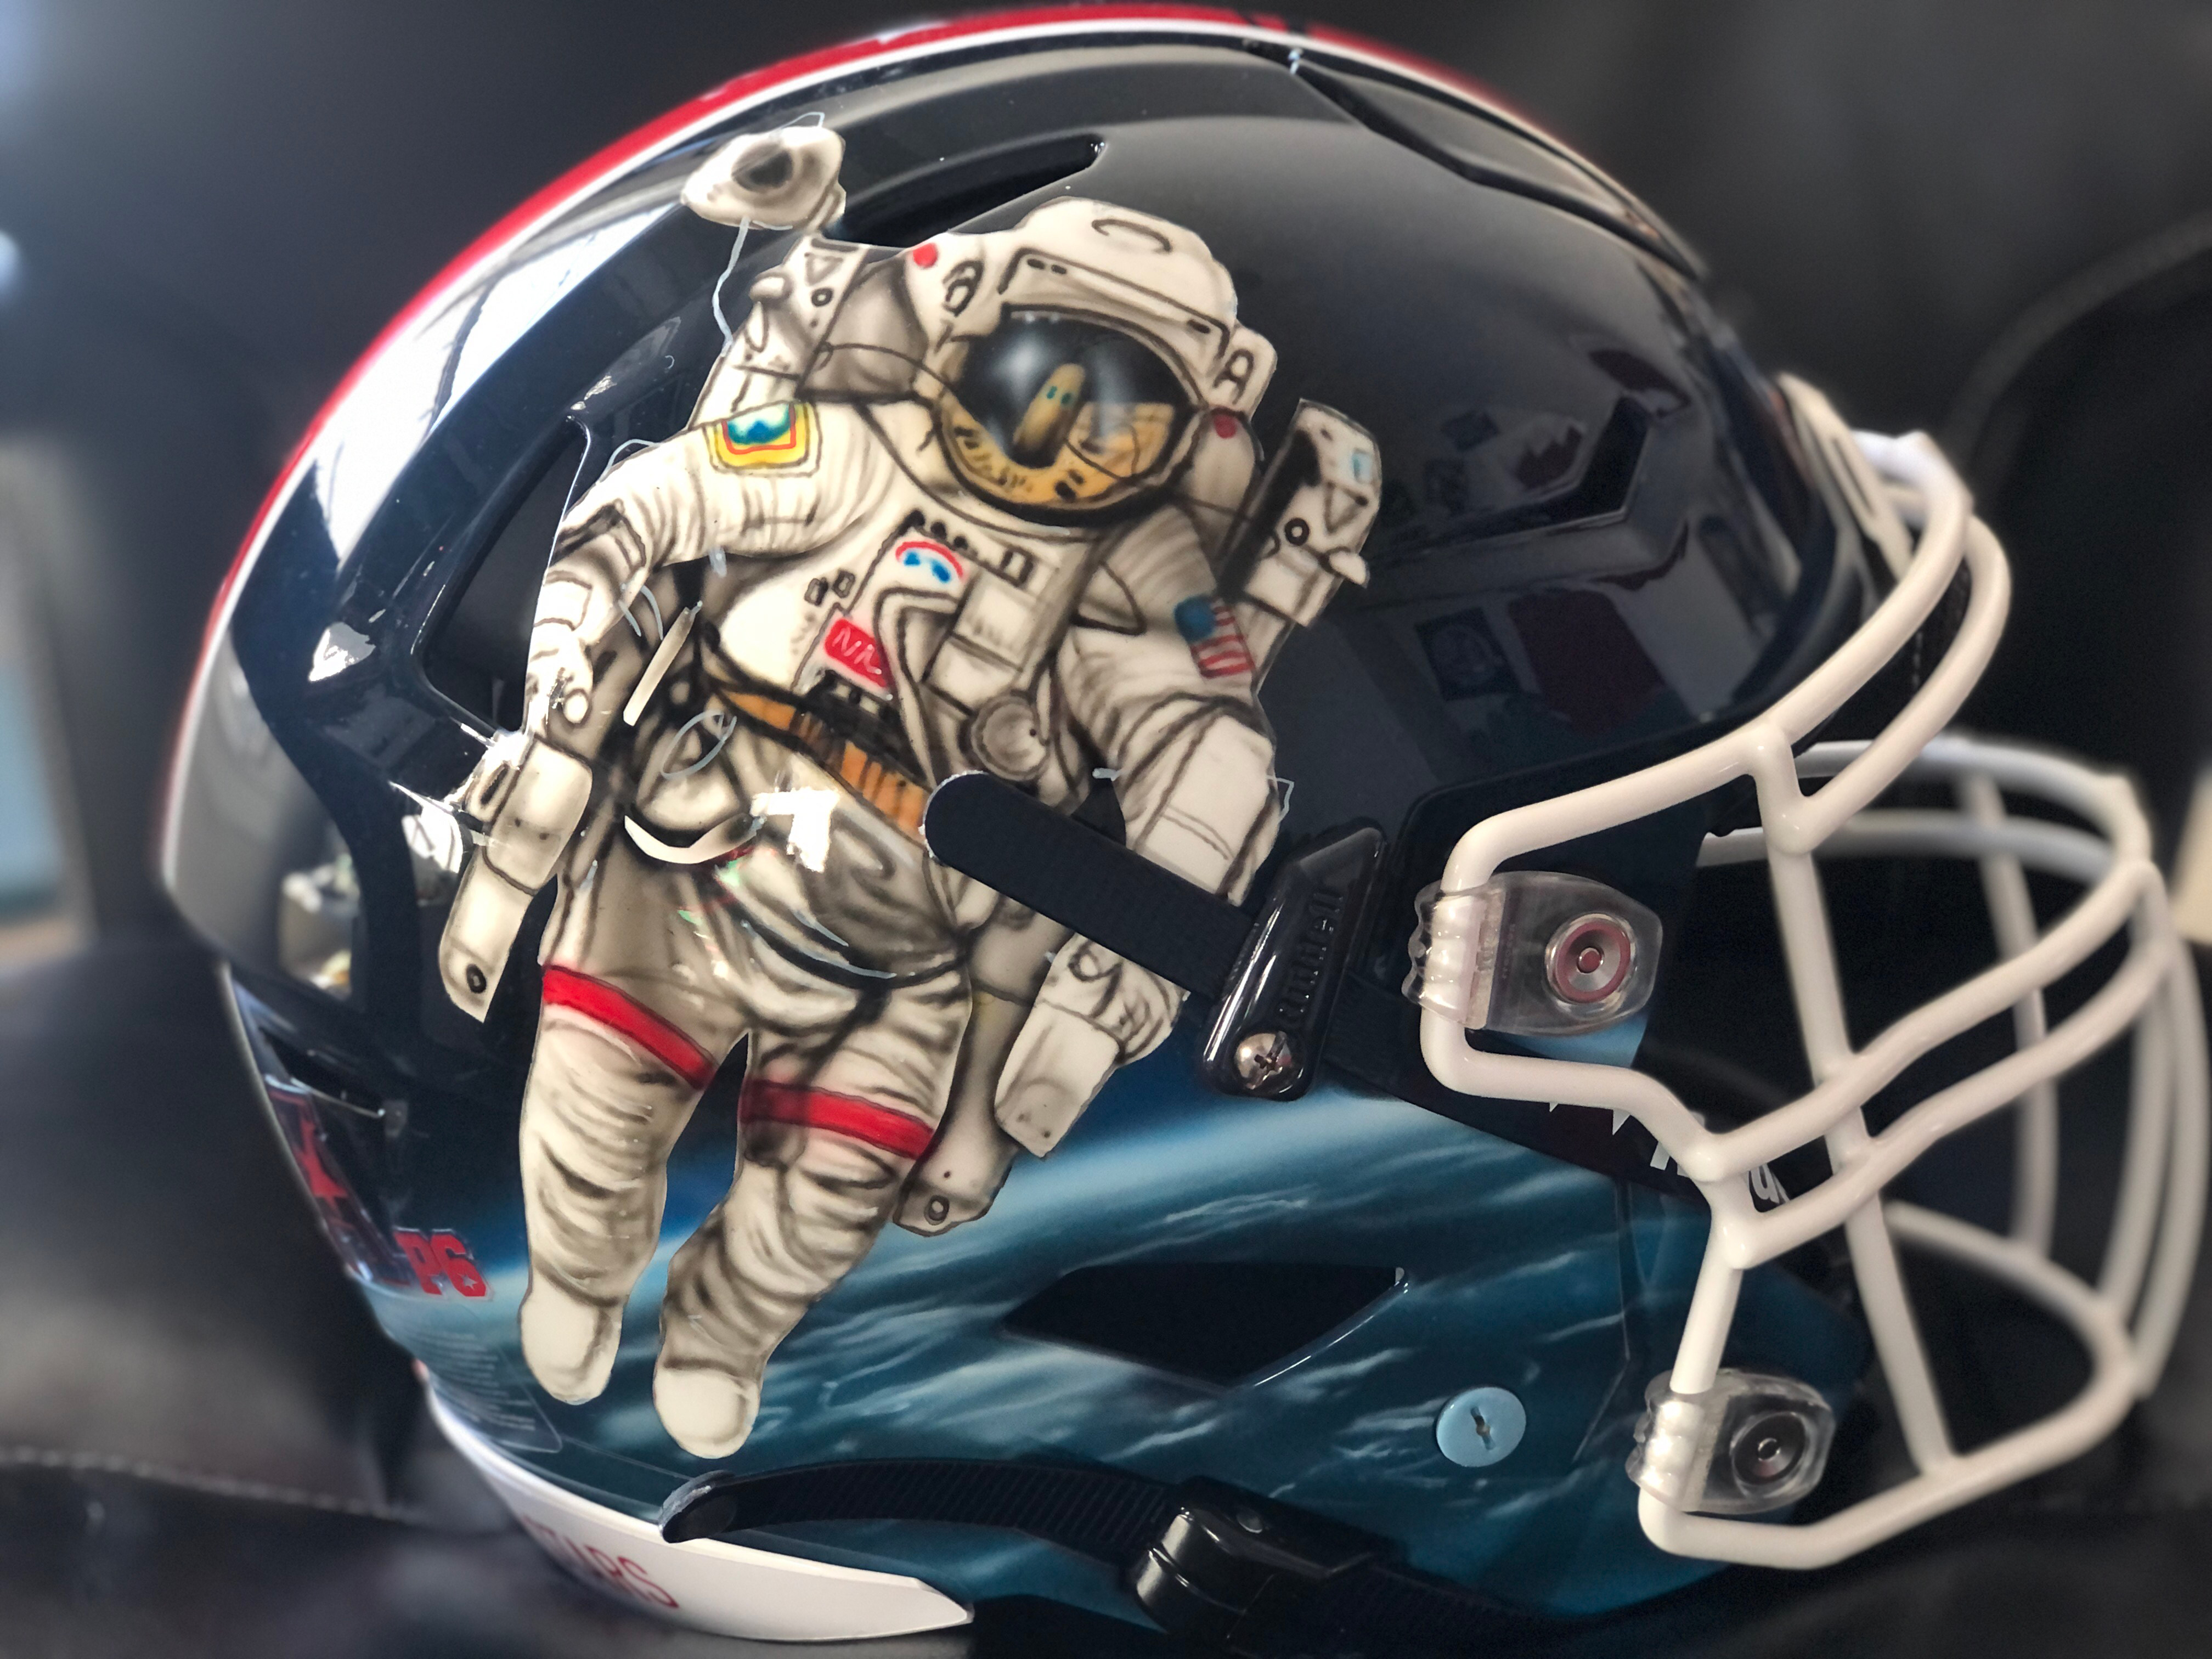 NASA-inspired uniforms extend Army-Navy Game's space history